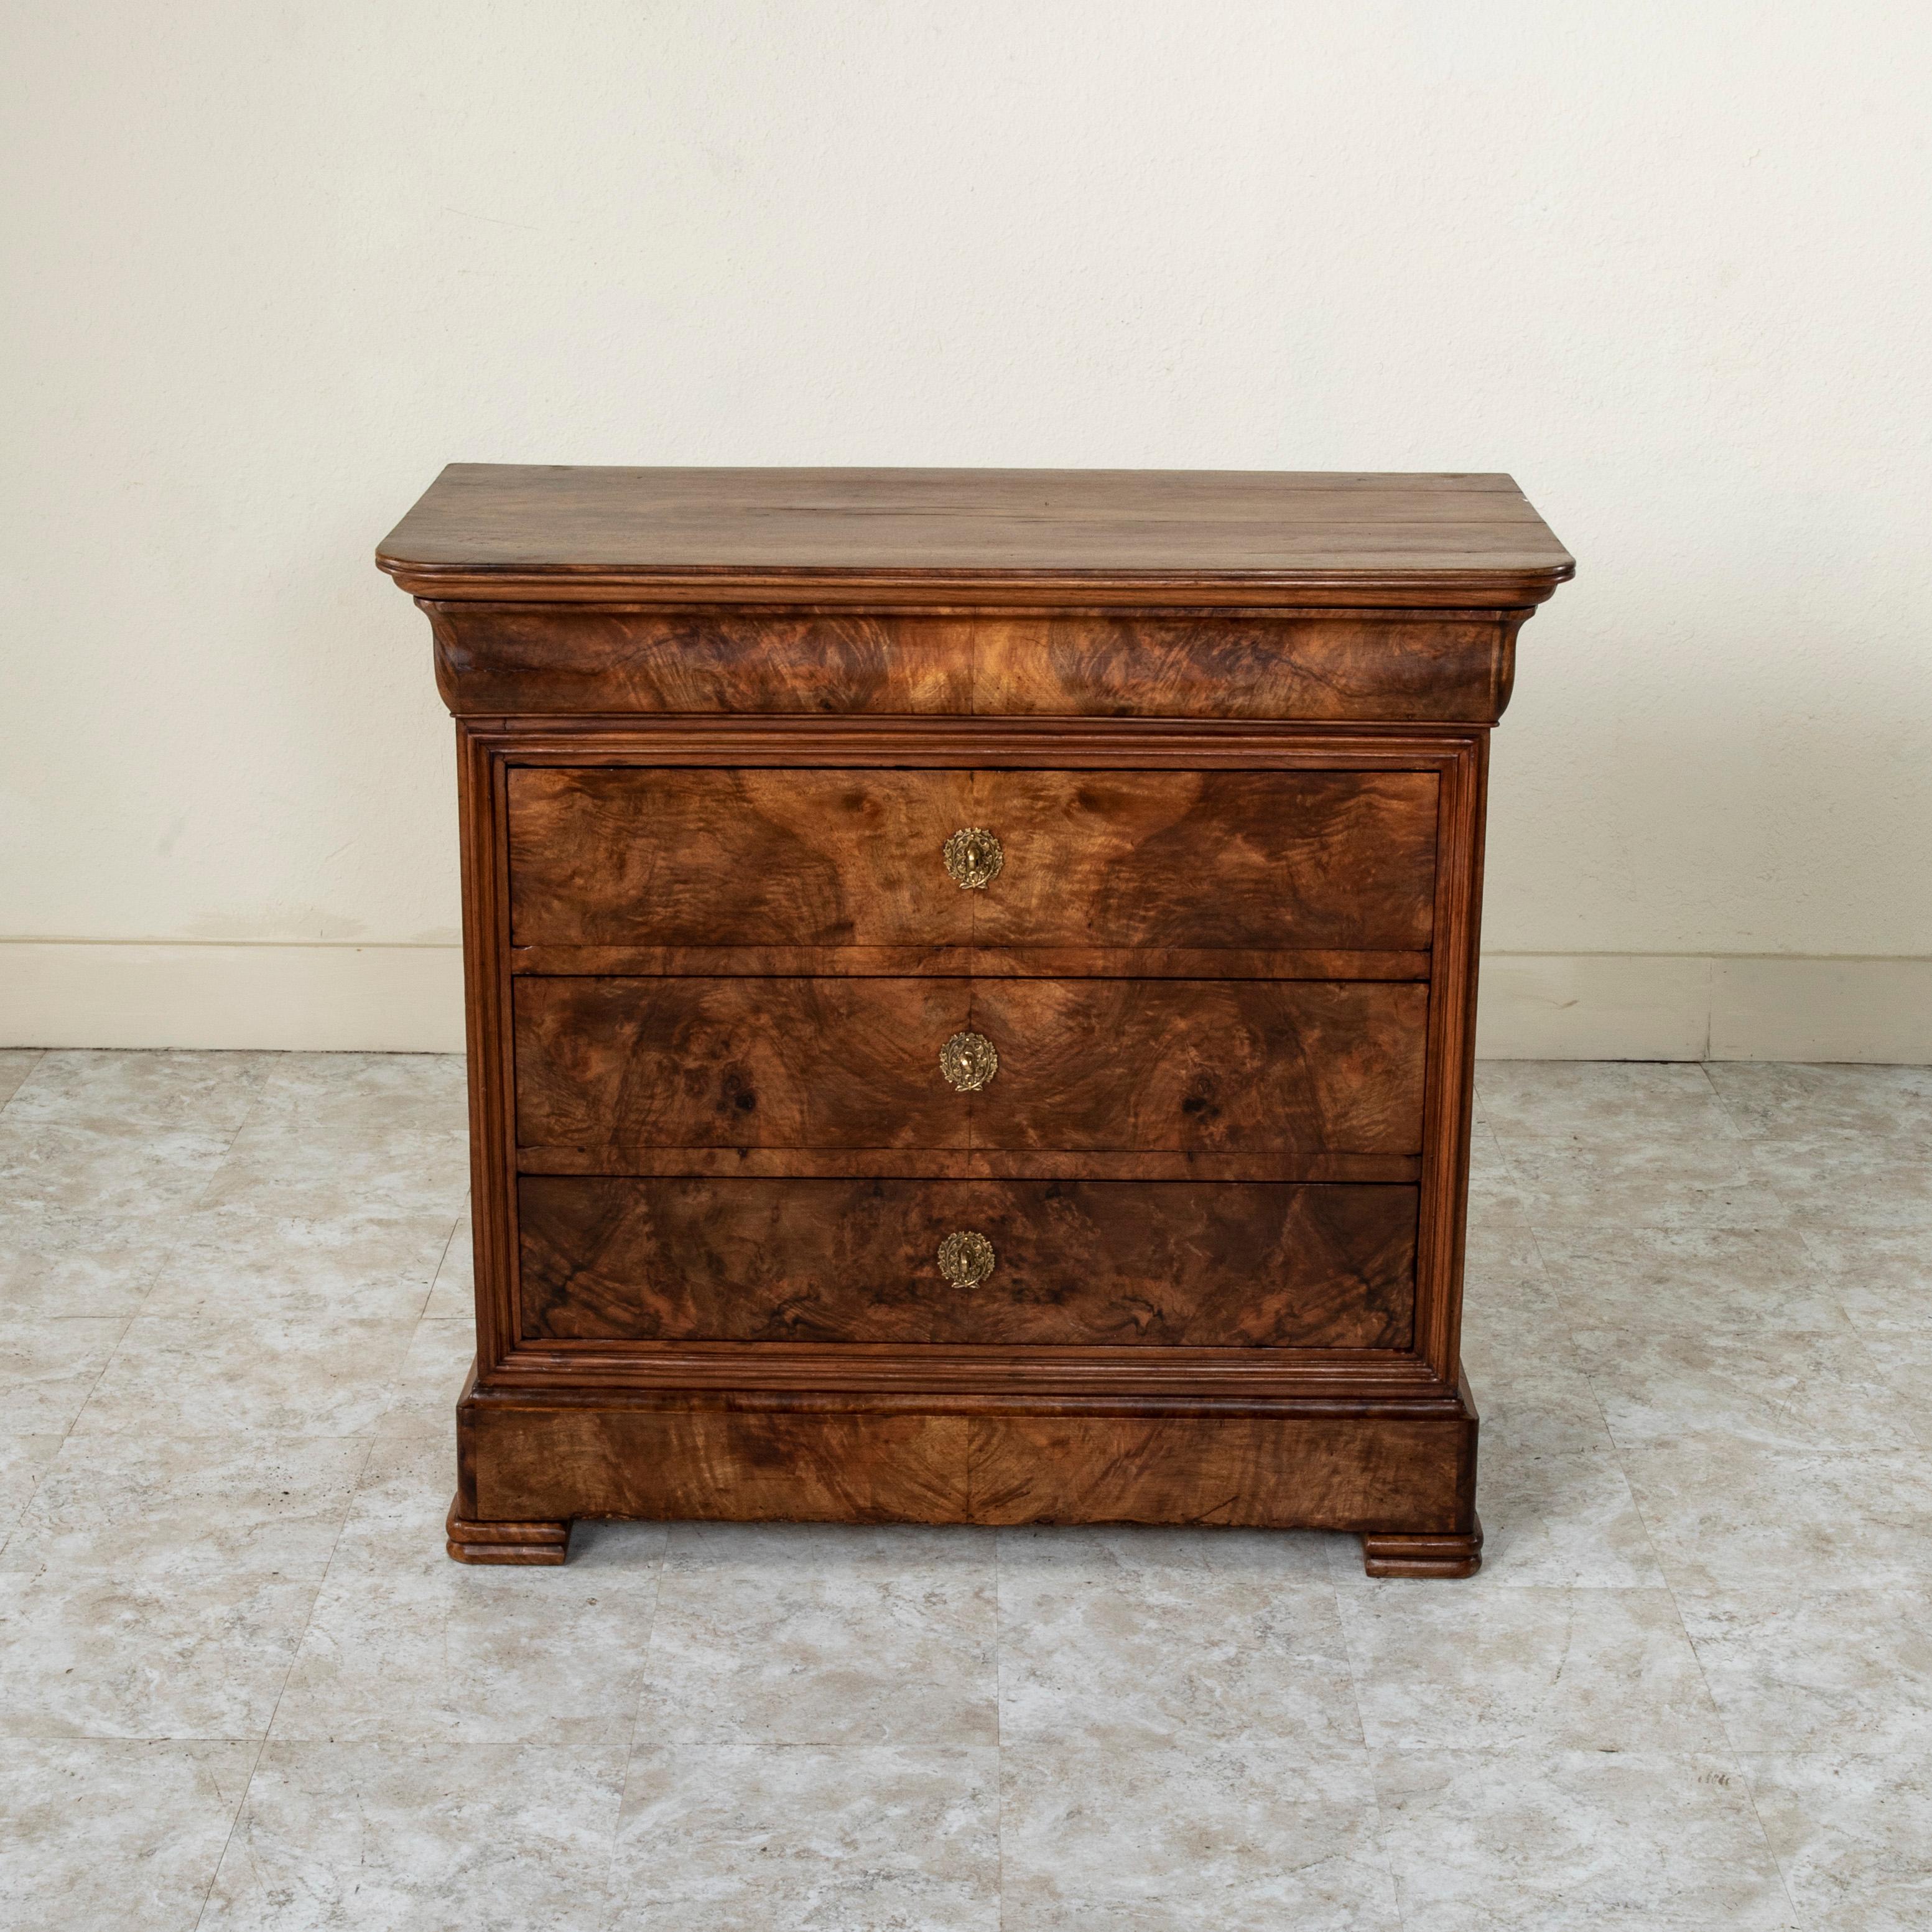 Unusual for its smaller scale with a 39.75 inch width, this quintessential Louis Philippe period commode or chest of drawers displays the exemplary craftsmanship of the early nineteenth century with a facade of book matched walnut and solid walnut